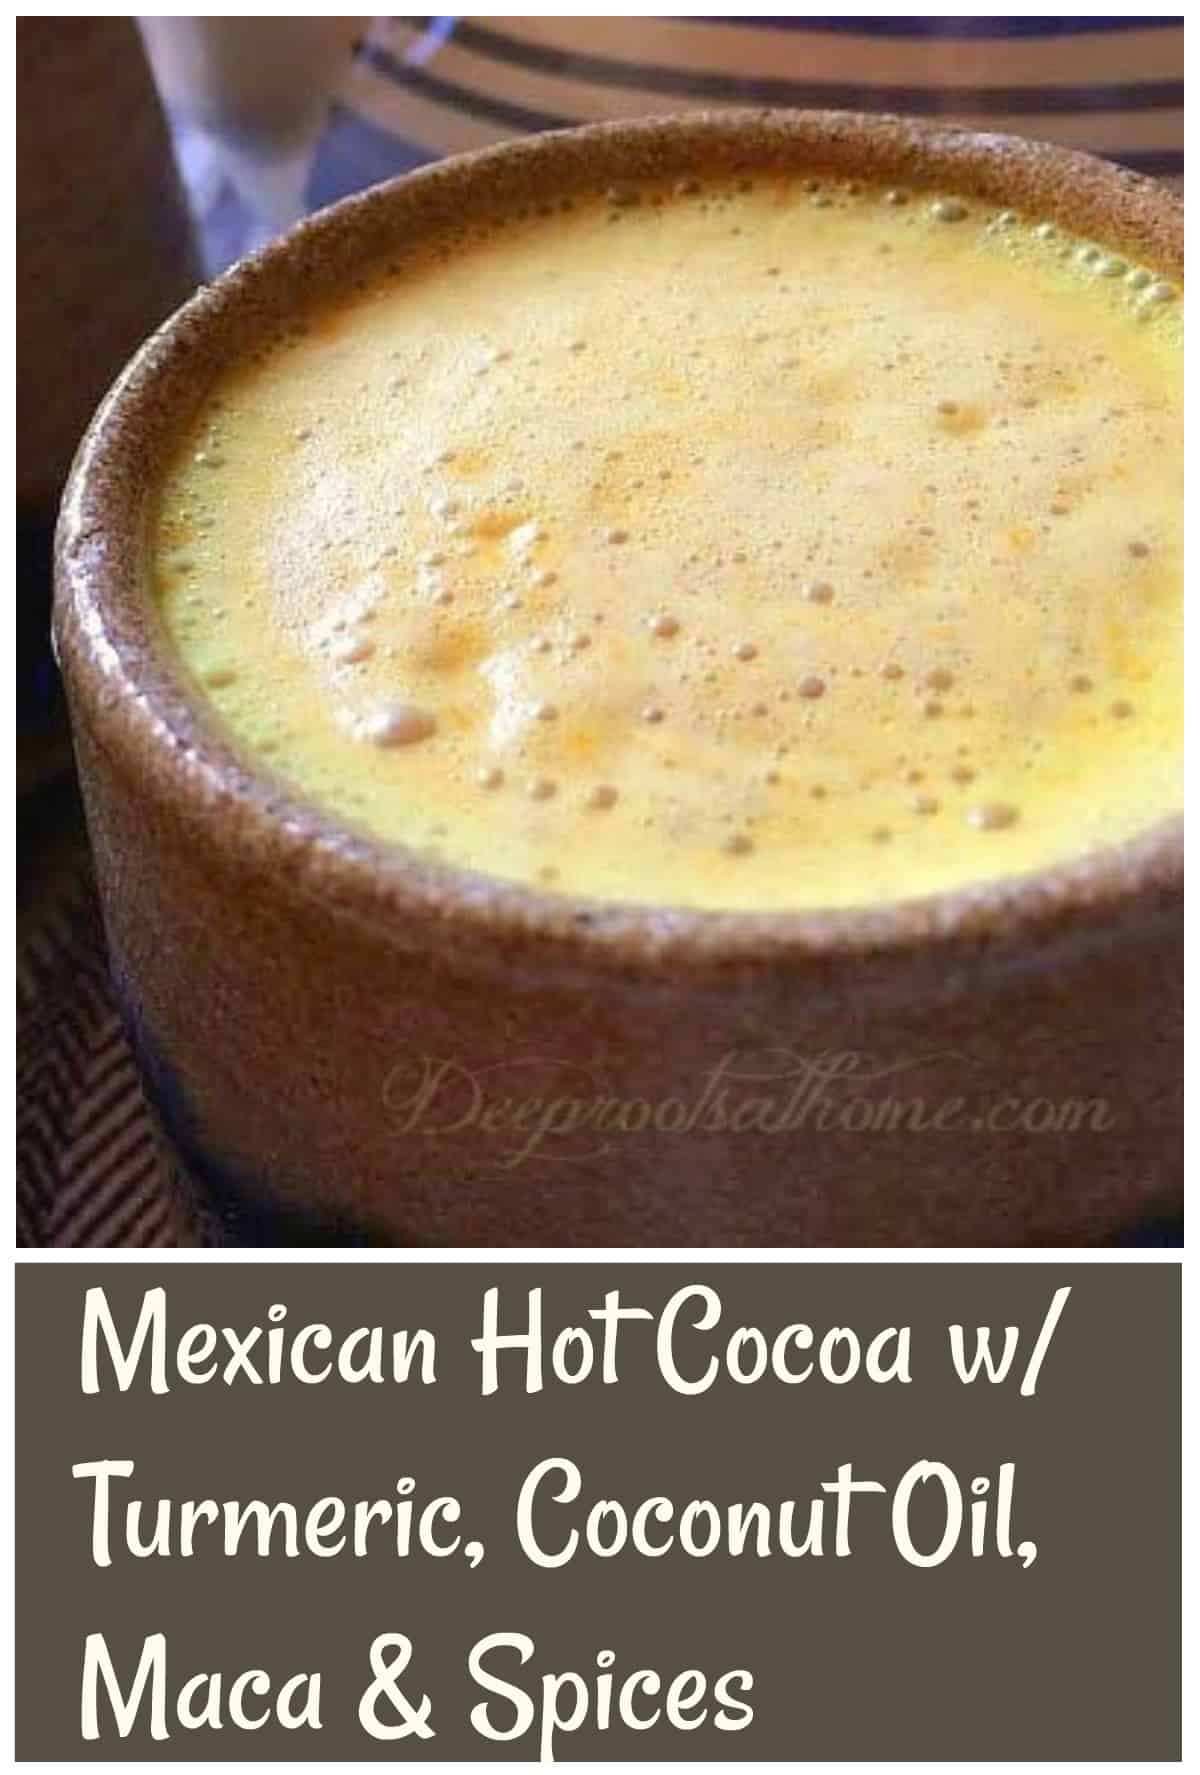 Mexican Hot Cocoa With Turmeric, Coconut Oil, Maca & Spices